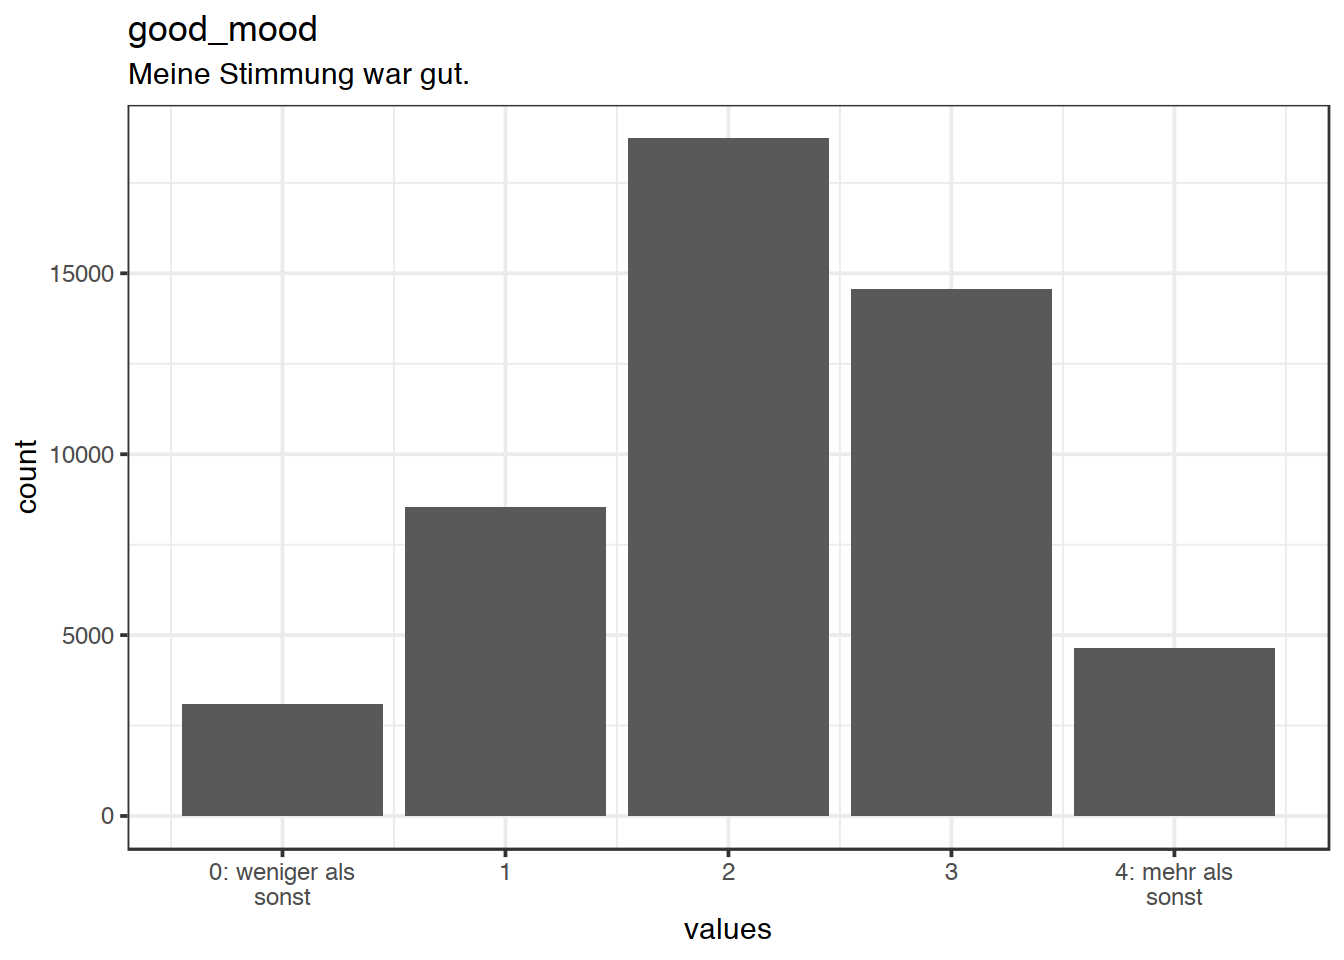 Distribution of values for good_mood